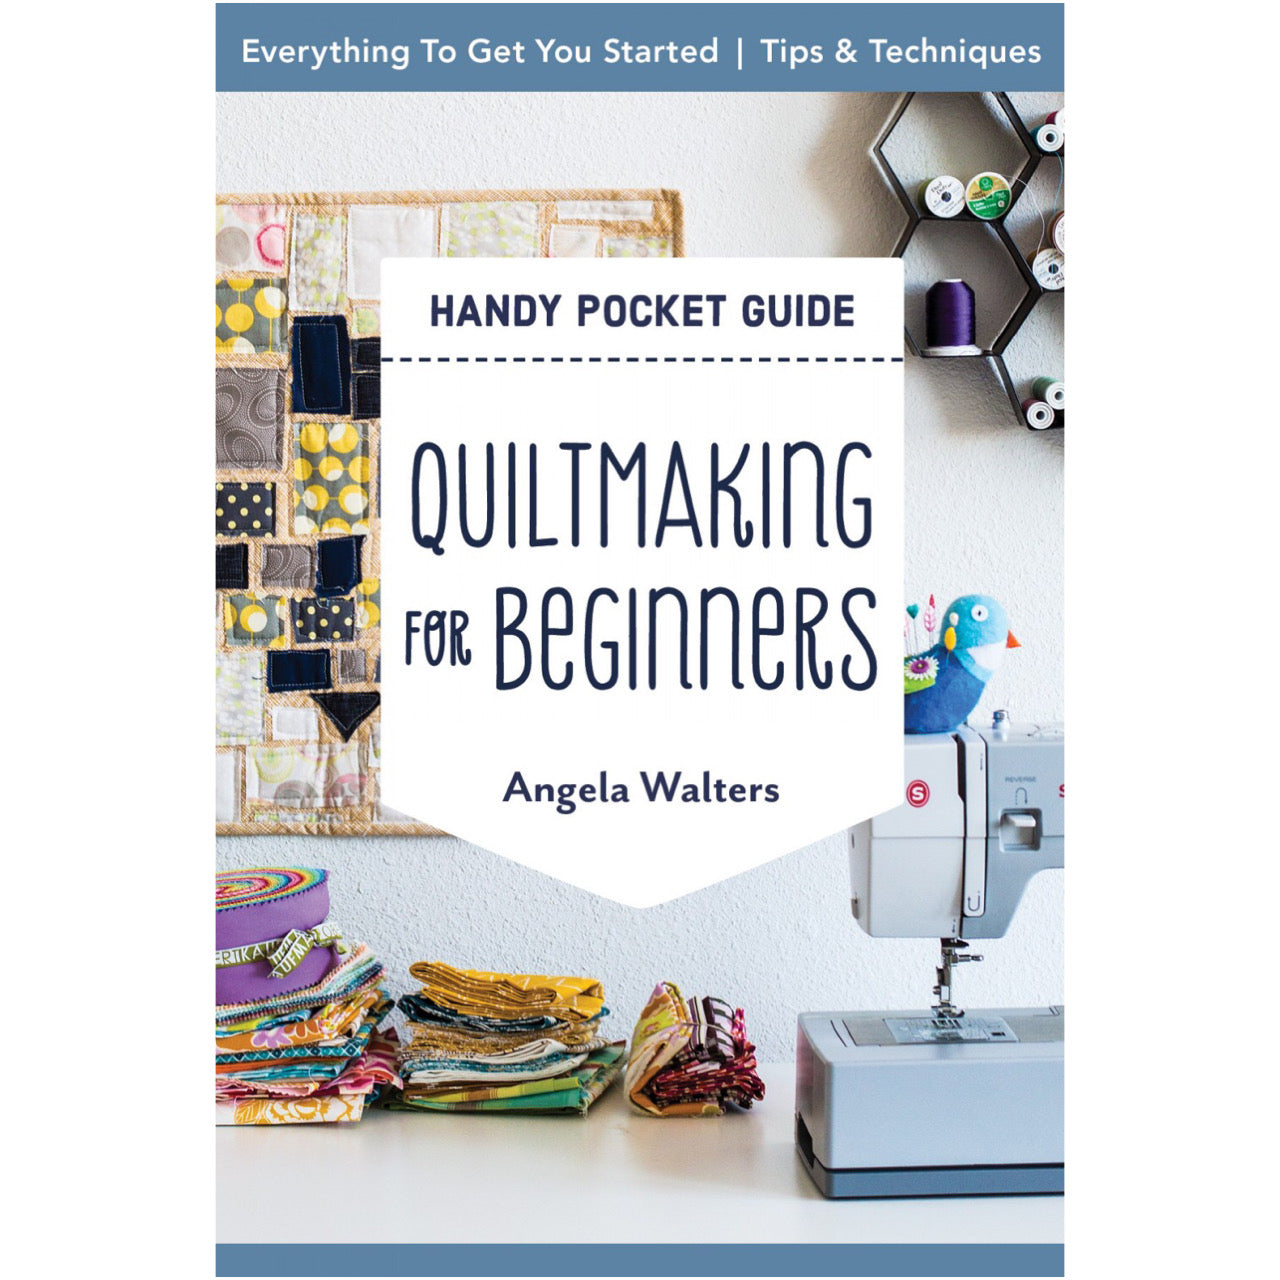 Handy Pocket Guide - Quiltmaking for Beginners by Angela Walters & Cloe Walters